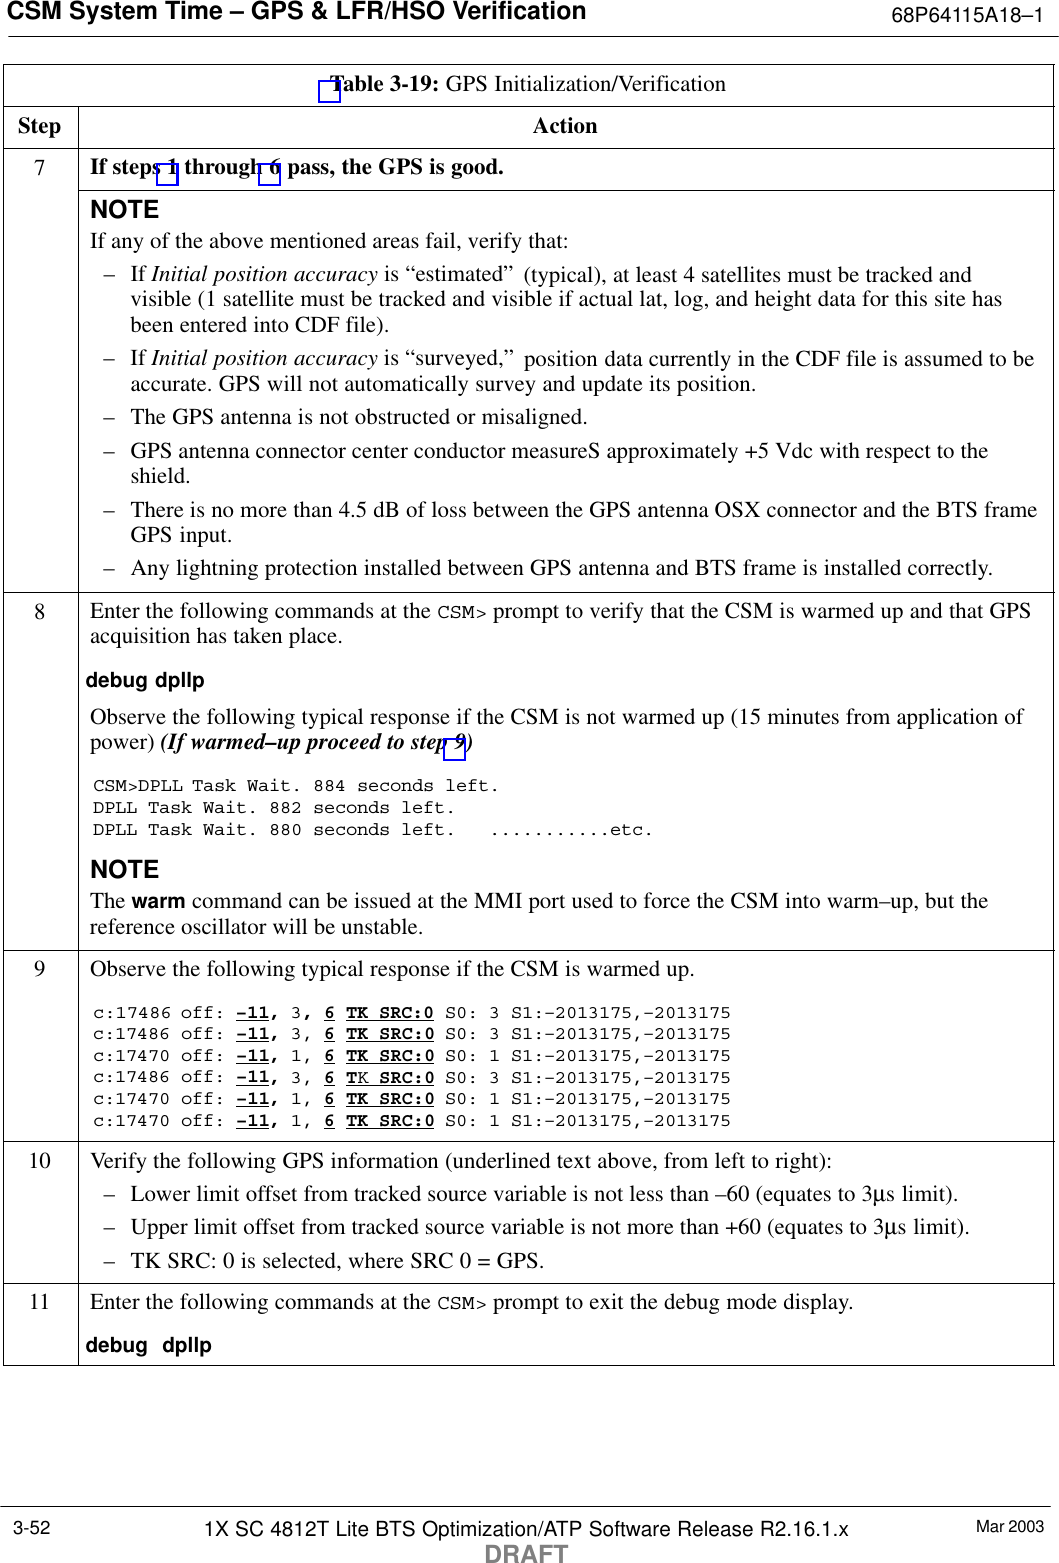 CSM System Time – GPS &amp; LFR/HSO Verification 68P64115A18–1Mar 20031X SC 4812T Lite BTS Optimization/ATP Software Release R2.16.1.xDRAFT3-52Table 3-19: GPS Initialization/VerificationStep Action7If steps 1 through 6 pass, the GPS is good.NOTEIf any of the above mentioned areas fail, verify that:– If Initial position accuracy is “estimated” (typical), at least 4 satellites must be tracked andvisible (1 satellite must be tracked and visible if actual lat, log, and height data for this site hasbeen entered into CDF file).– If Initial position accuracy is “surveyed,” position data currently in the CDF file is assumed to beaccurate. GPS will not automatically survey and update its position.– The GPS antenna is not obstructed or misaligned.– GPS antenna connector center conductor measureS approximately +5 Vdc with respect to theshield.– There is no more than 4.5 dB of loss between the GPS antenna OSX connector and the BTS frameGPS input.– Any lightning protection installed between GPS antenna and BTS frame is installed correctly.8Enter the following commands at the CSM&gt; prompt to verify that the CSM is warmed up and that GPSacquisition has taken place.debug dpllp Observe the following typical response if the CSM is not warmed up (15 minutes from application ofpower) (If warmed–up proceed to step 9)CSM&gt;DPLL Task Wait. 884 seconds left.DPLL Task Wait. 882 seconds left.DPLL Task Wait. 880 seconds left.   ...........etc.NOTEThe warm command can be issued at the MMI port used to force the CSM into warm–up, but thereference oscillator will be unstable.9Observe the following typical response if the CSM is warmed up.c:17486 off: –11, 3, 6 TK SRC:0 S0: 3 S1:–2013175,–2013175c:17486 off: –11, 3, 6 TK SRC:0 S0: 3 S1:–2013175,–2013175c:17470 off: –11, 1, 6 TK SRC:0 S0: 1 S1:–2013175,–2013175c:17486 off: –11, 3, 6 TK SRC:0 S0: 3 S1:–2013175,–2013175c:17470 off: –11, 1, 6 TK SRC:0 S0: 1 S1:–2013175,–2013175c:17470 off: –11, 1, 6 TK SRC:0 S0: 1 S1:–2013175,–201317510 Verify the following GPS information (underlined text above, from left to right):– Lower limit offset from tracked source variable is not less than –60 (equates to 3µs limit).– Upper limit offset from tracked source variable is not more than +60 (equates to 3µs limit).– TK SRC: 0 is selected, where SRC 0 = GPS.11 Enter the following commands at the CSM&gt; prompt to exit the debug mode display.debug  dpllp 